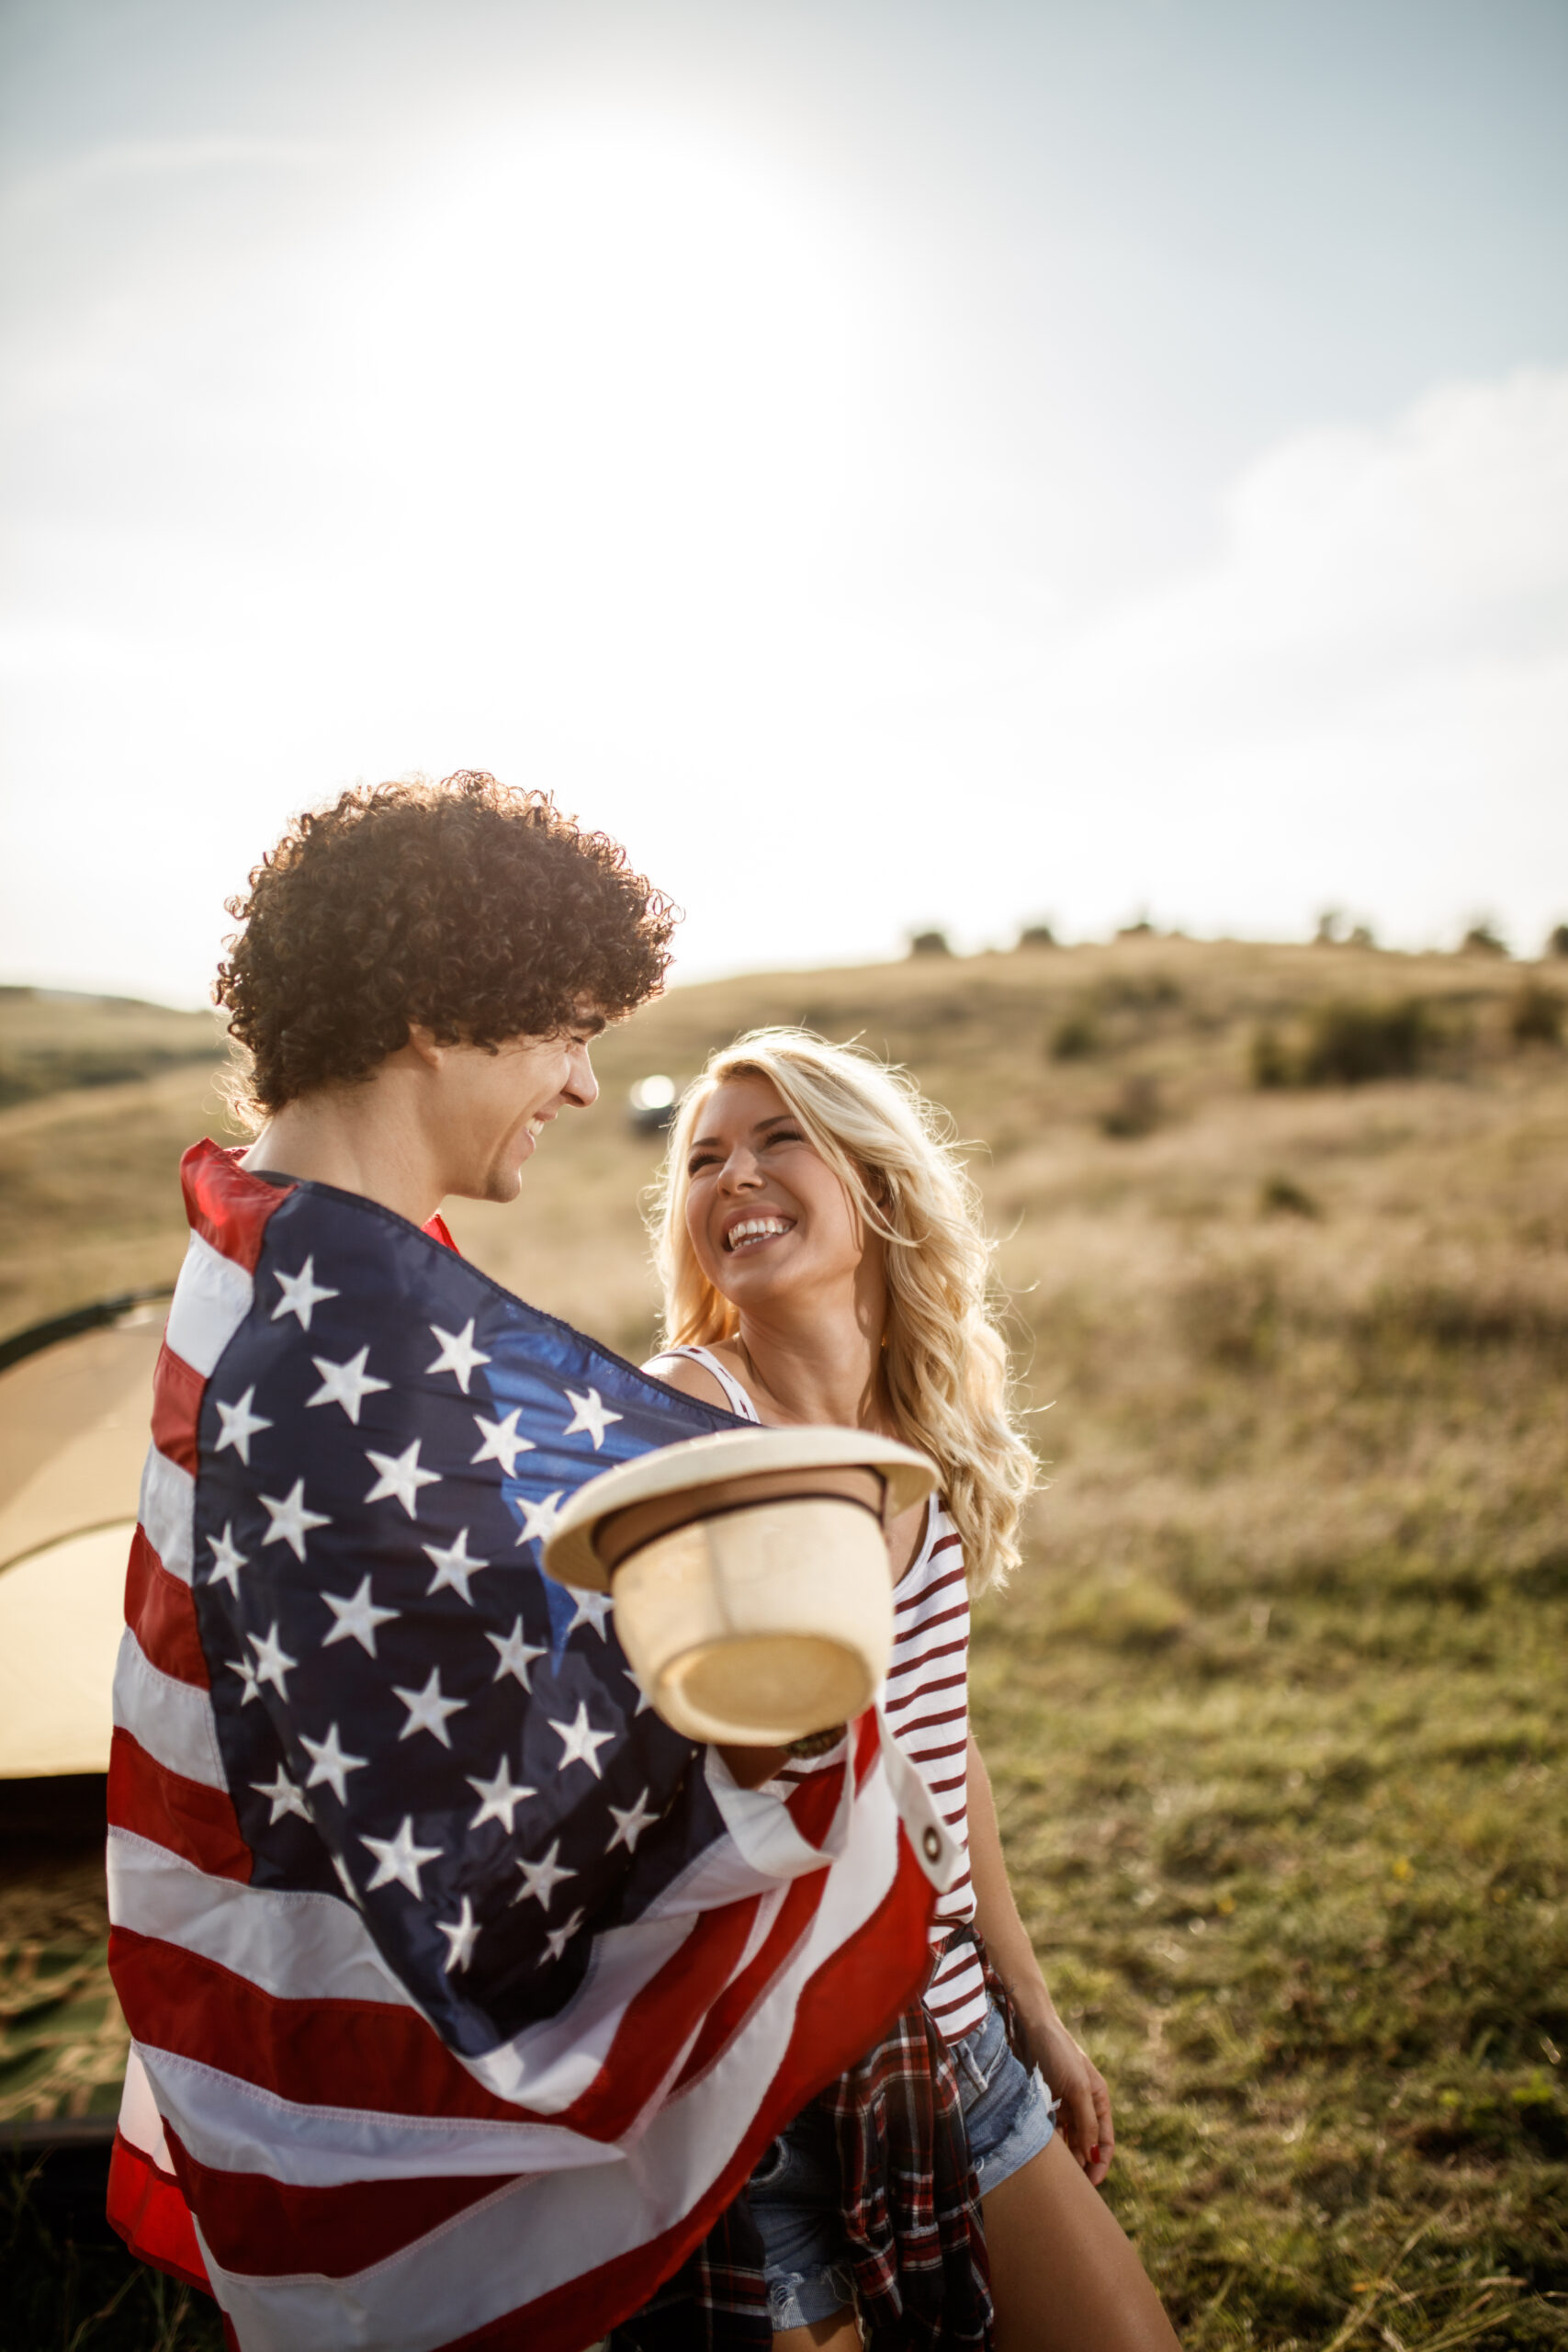 An ecstatic couple smiling because they learned about how non-qm DSCR loans and bank statement jumbo loans can enable them to achieve and live their American Dream.